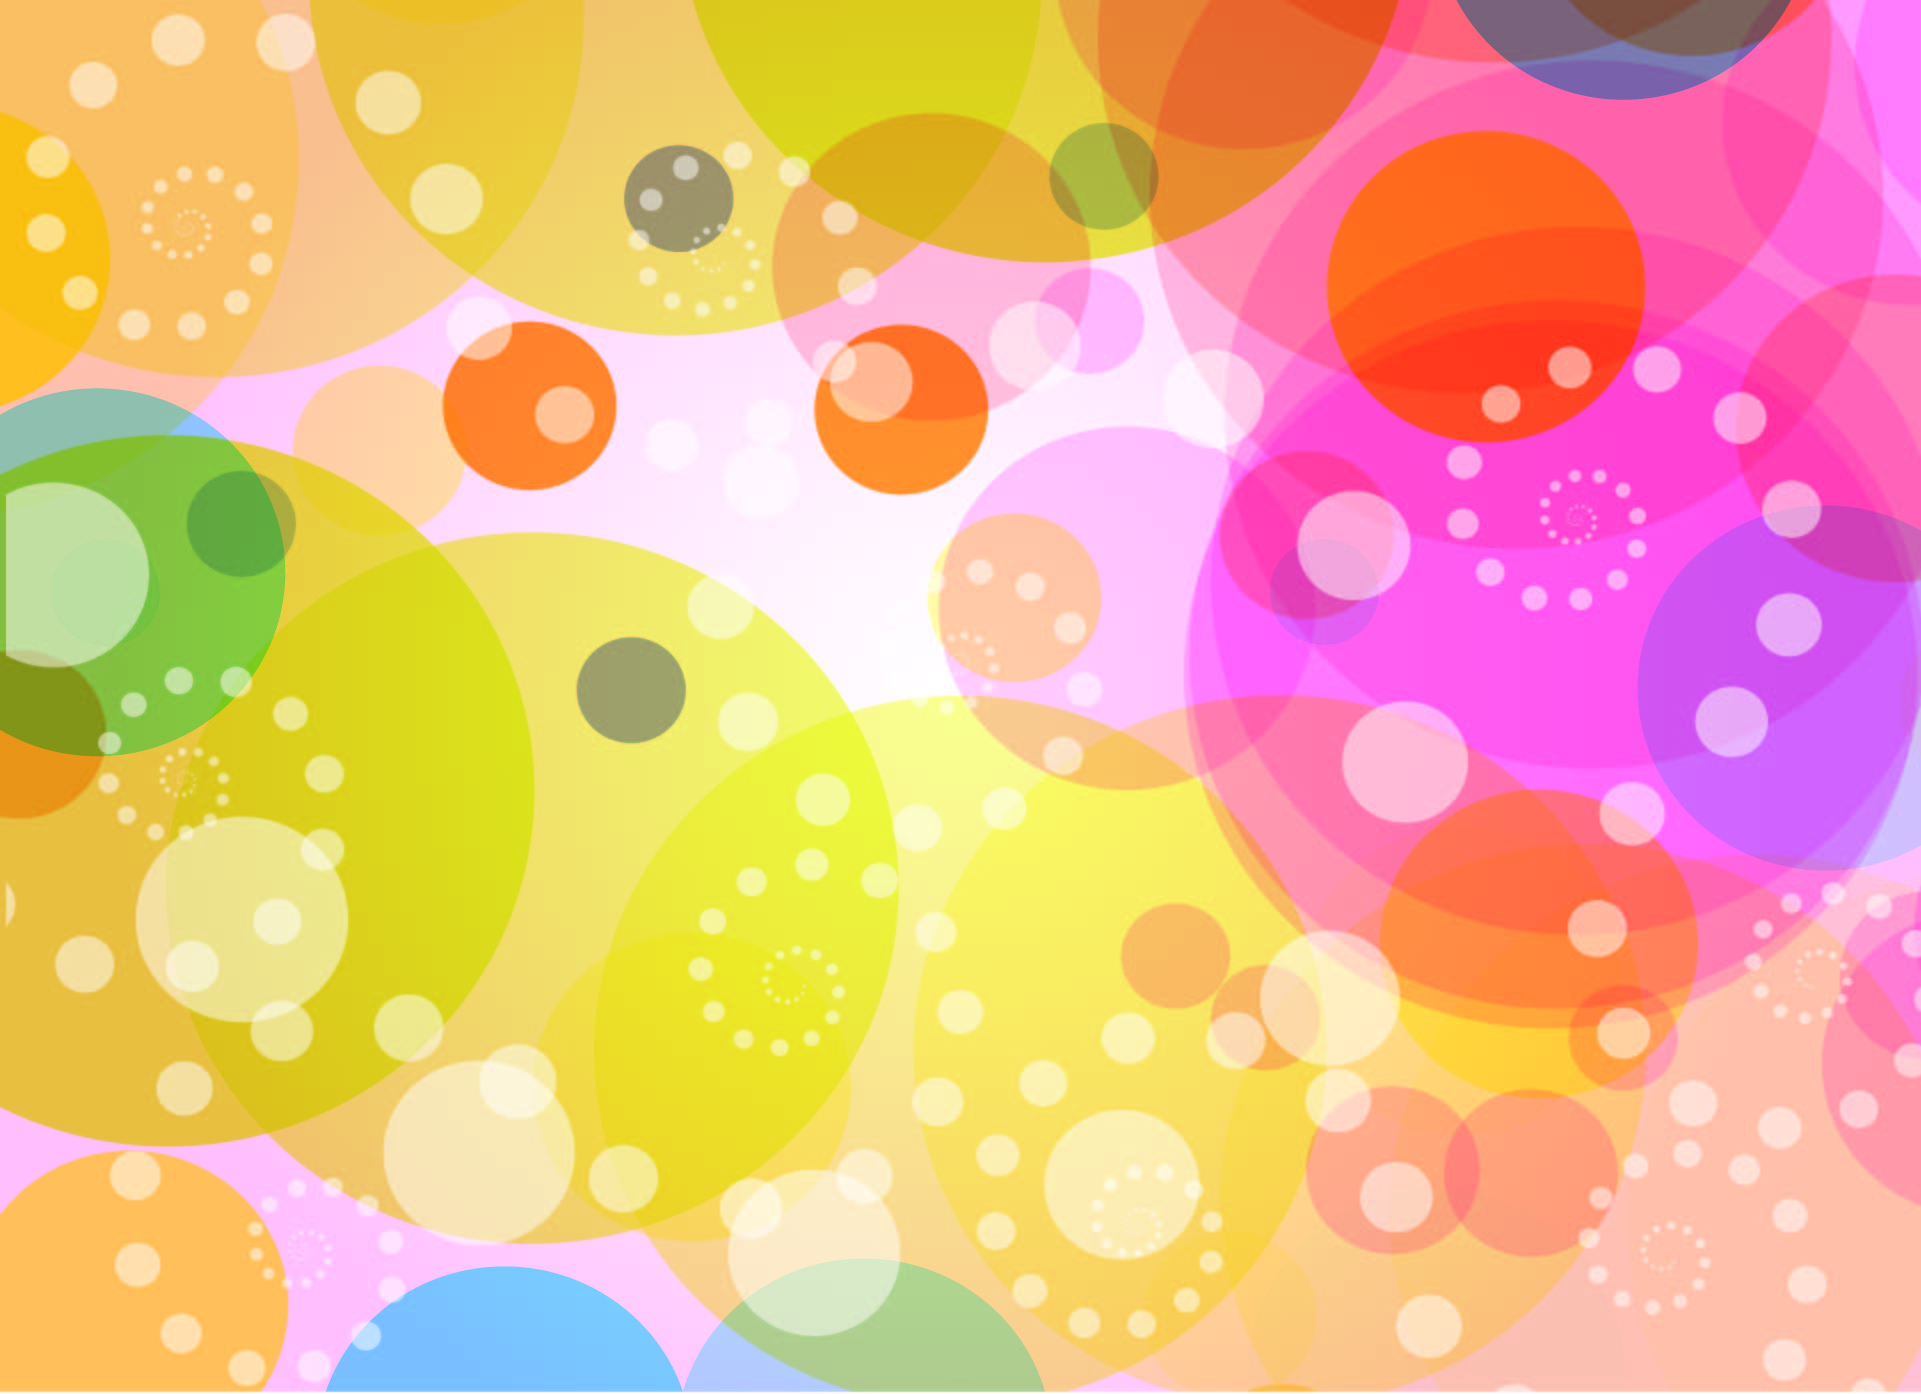 colorful vector image